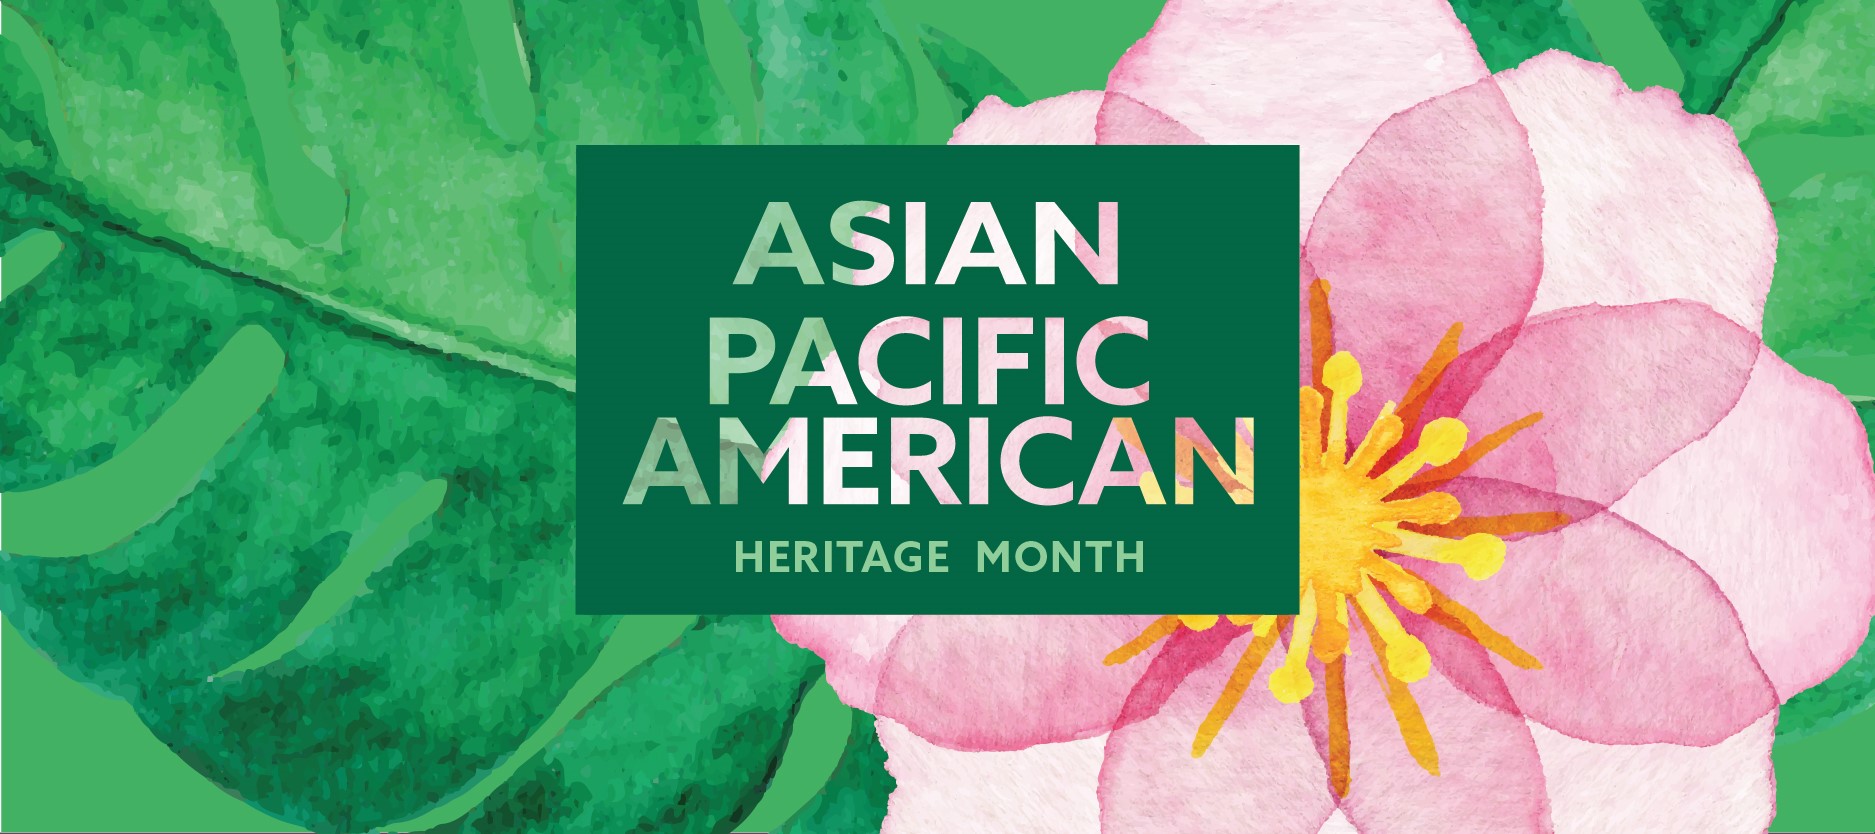 A brief appreciation of the Asian (and Asian Pacific-heritage